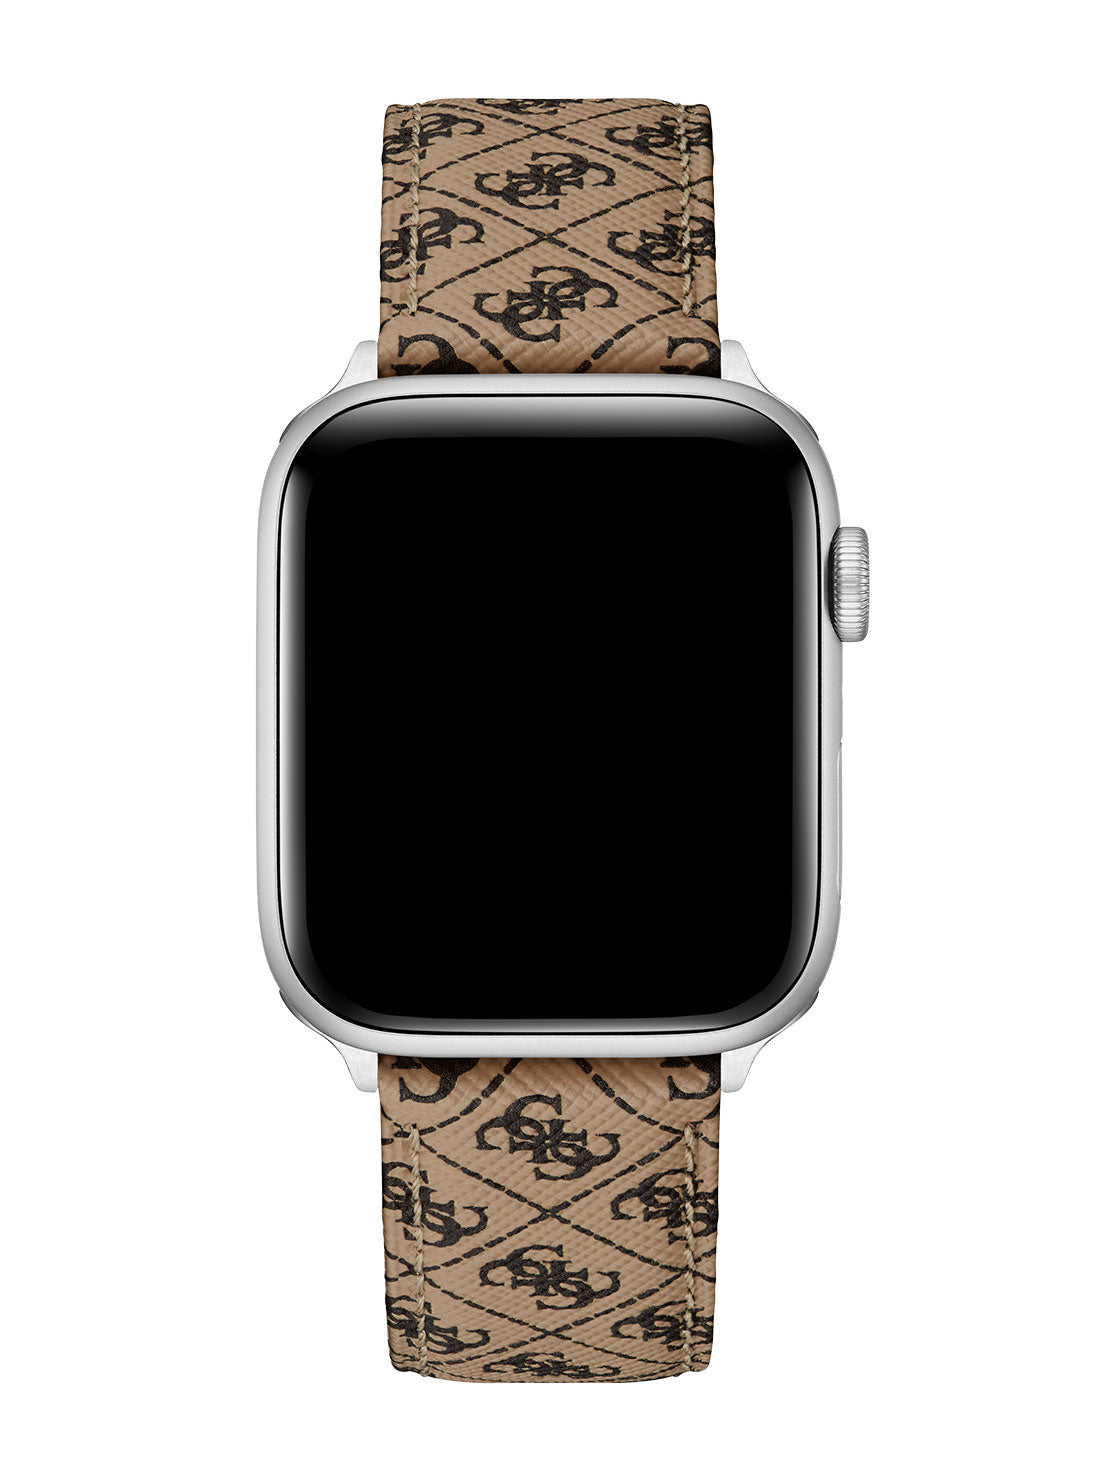 GUESS Men's Brown Quattro G Leather Apple Watch Strap CS3001S1 Front View